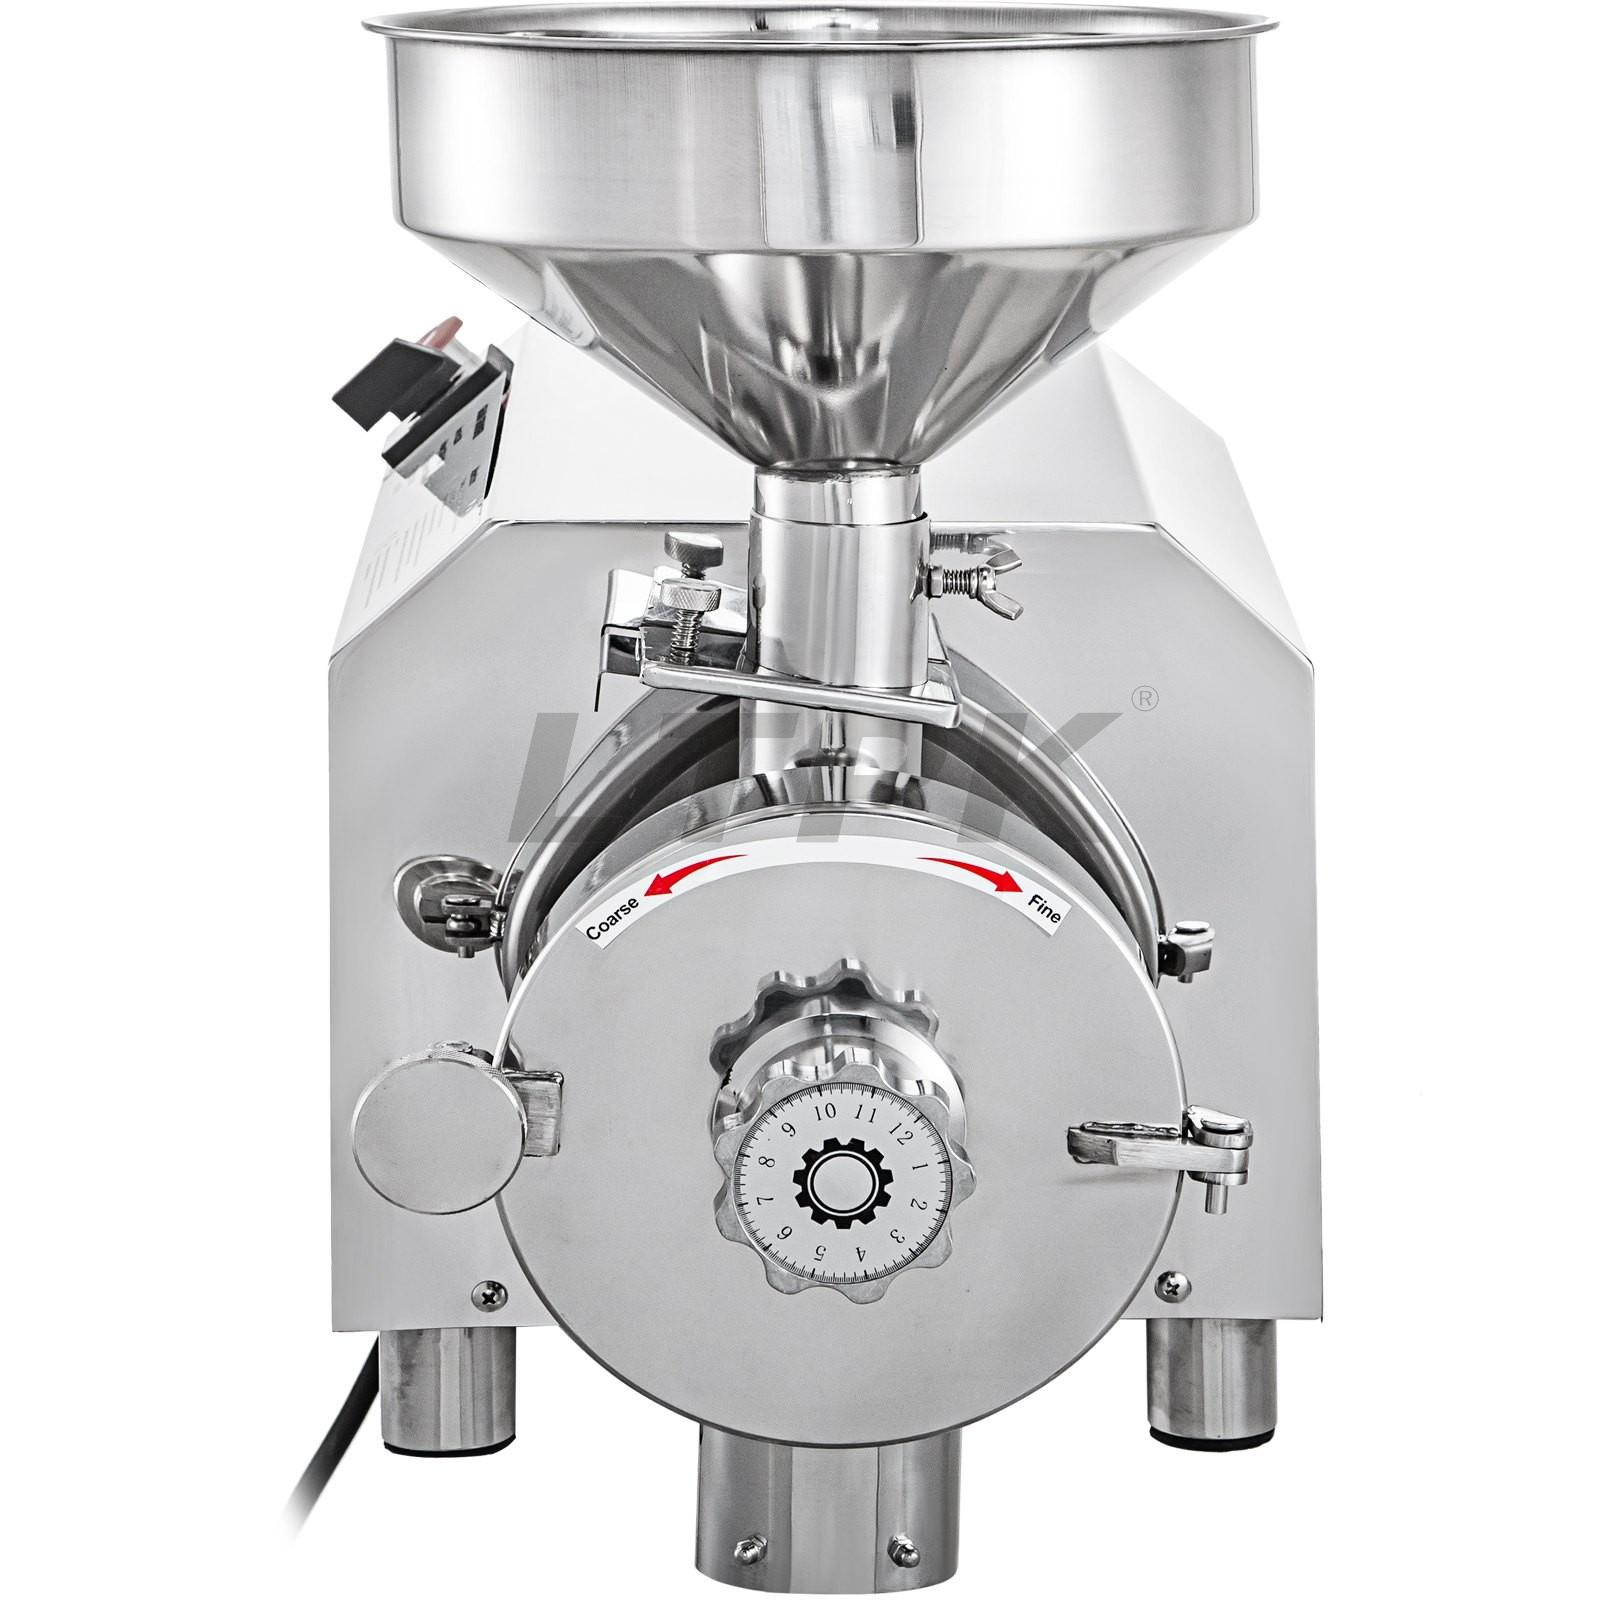 LT-2200 2.2KW Automatic Industrial Superfine Grain Grinder for Dried Materials Chinese Herb Spice Pepper Soybean